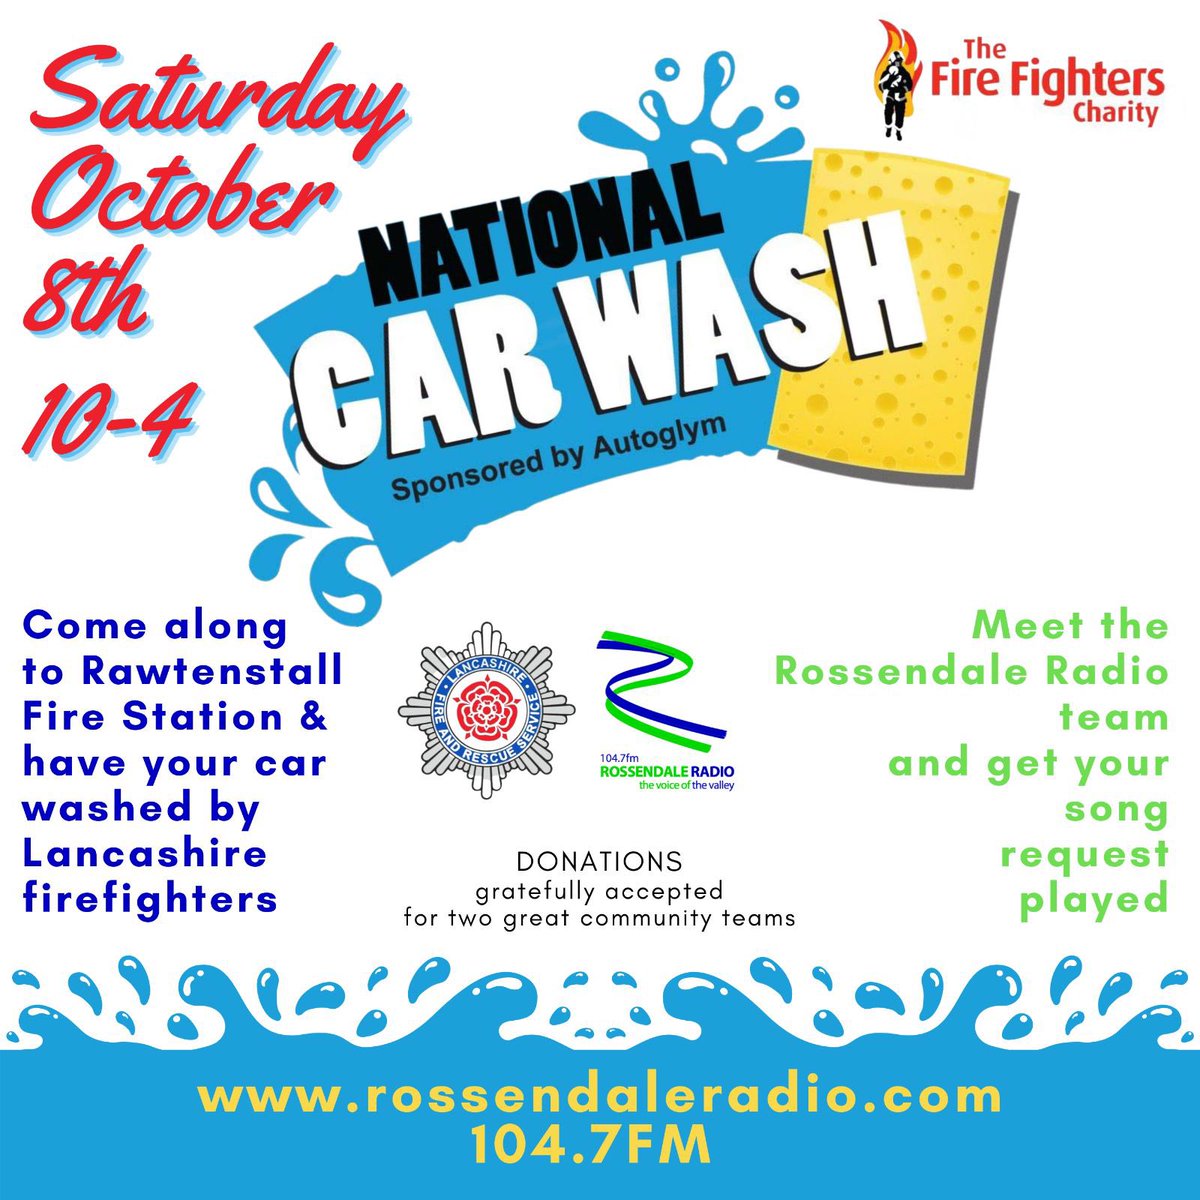 It’s back! We have a new date for the BIG Car Wash, with our friends at @RawtenstallFire and @LancashireFRS - come down, make a donation, and get your car washed. Saturday 8th October. See you there?